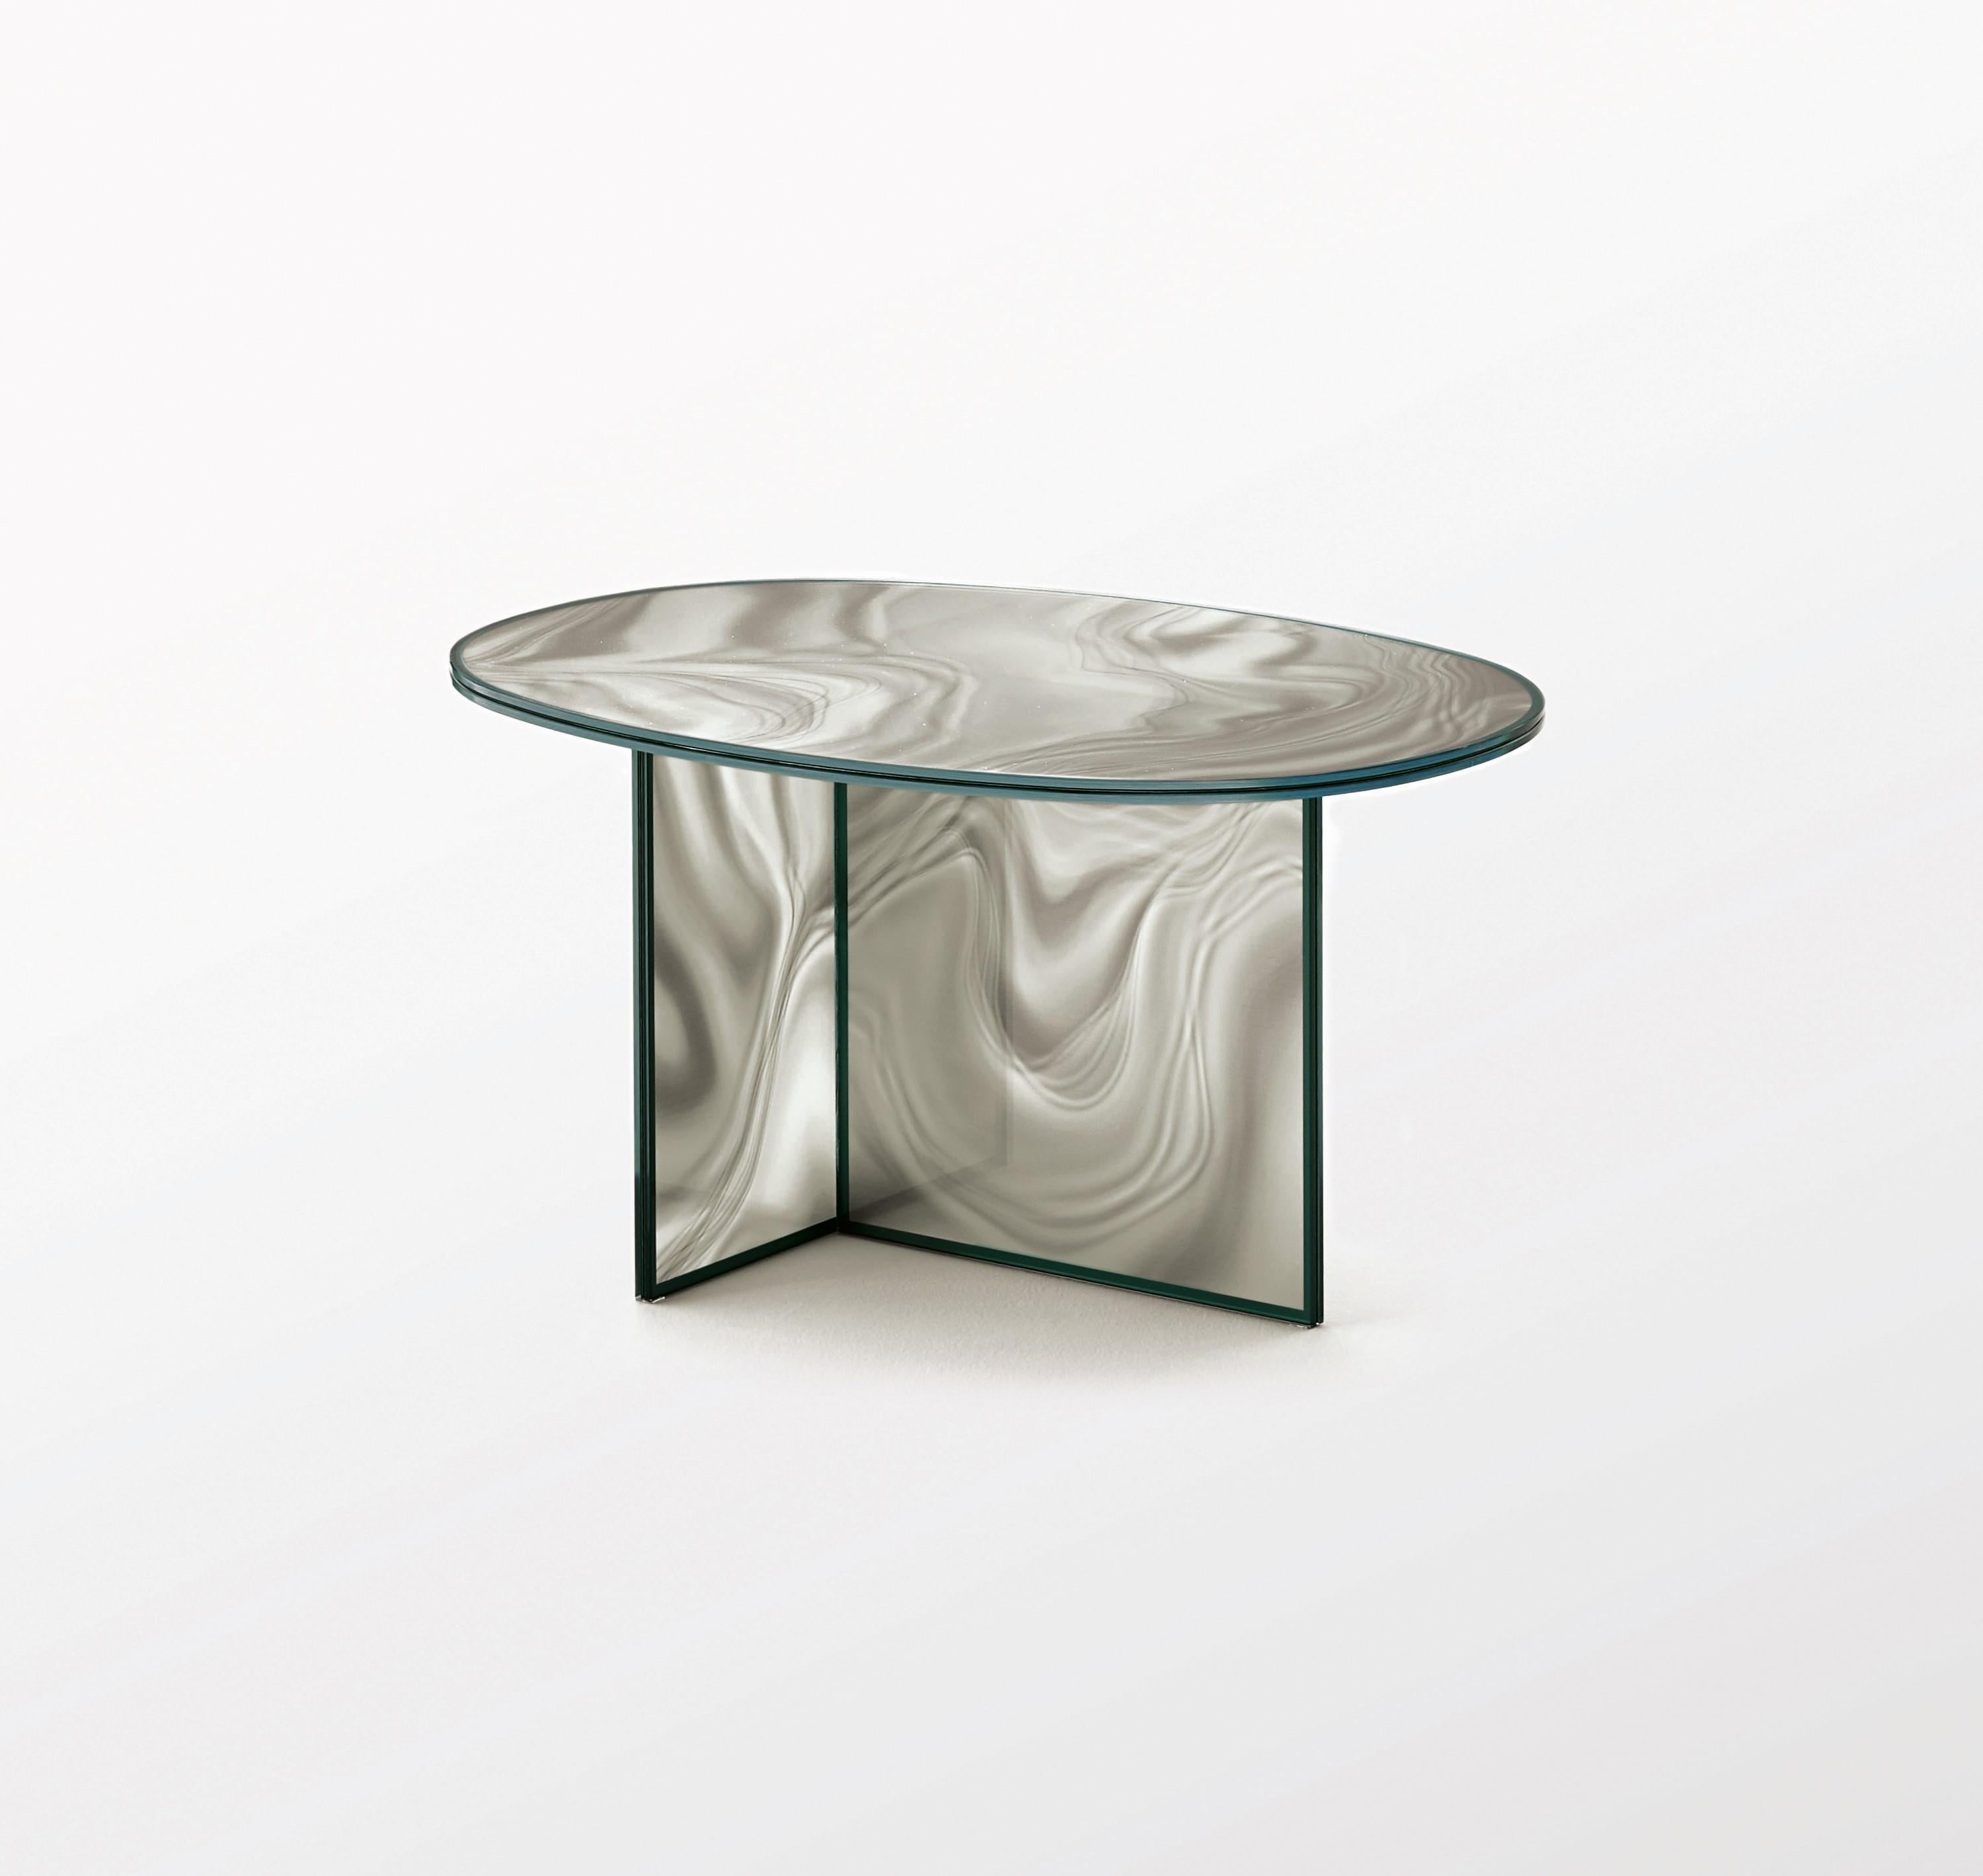 High and low oval-shaped tables in tempered extra light glass, with faded and irregular decoration which takes on the color and veins of marble.
The surprising image changing effect makes the veining look dynamic and variable depending on the